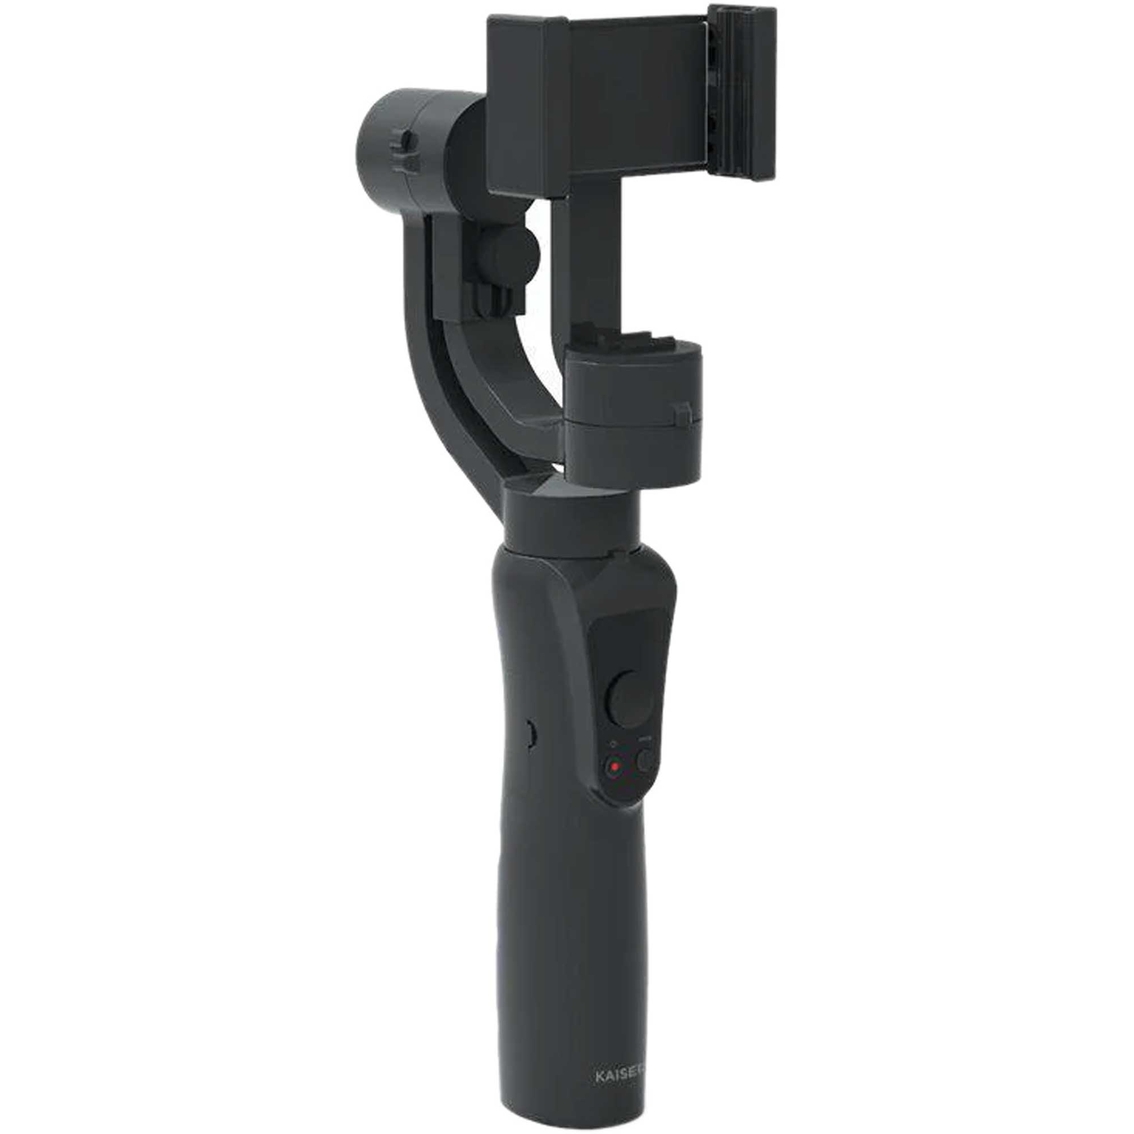 Kaiser Baas XS3 3-Axis Pro Stabilized Gimbal - Image 3 of 5